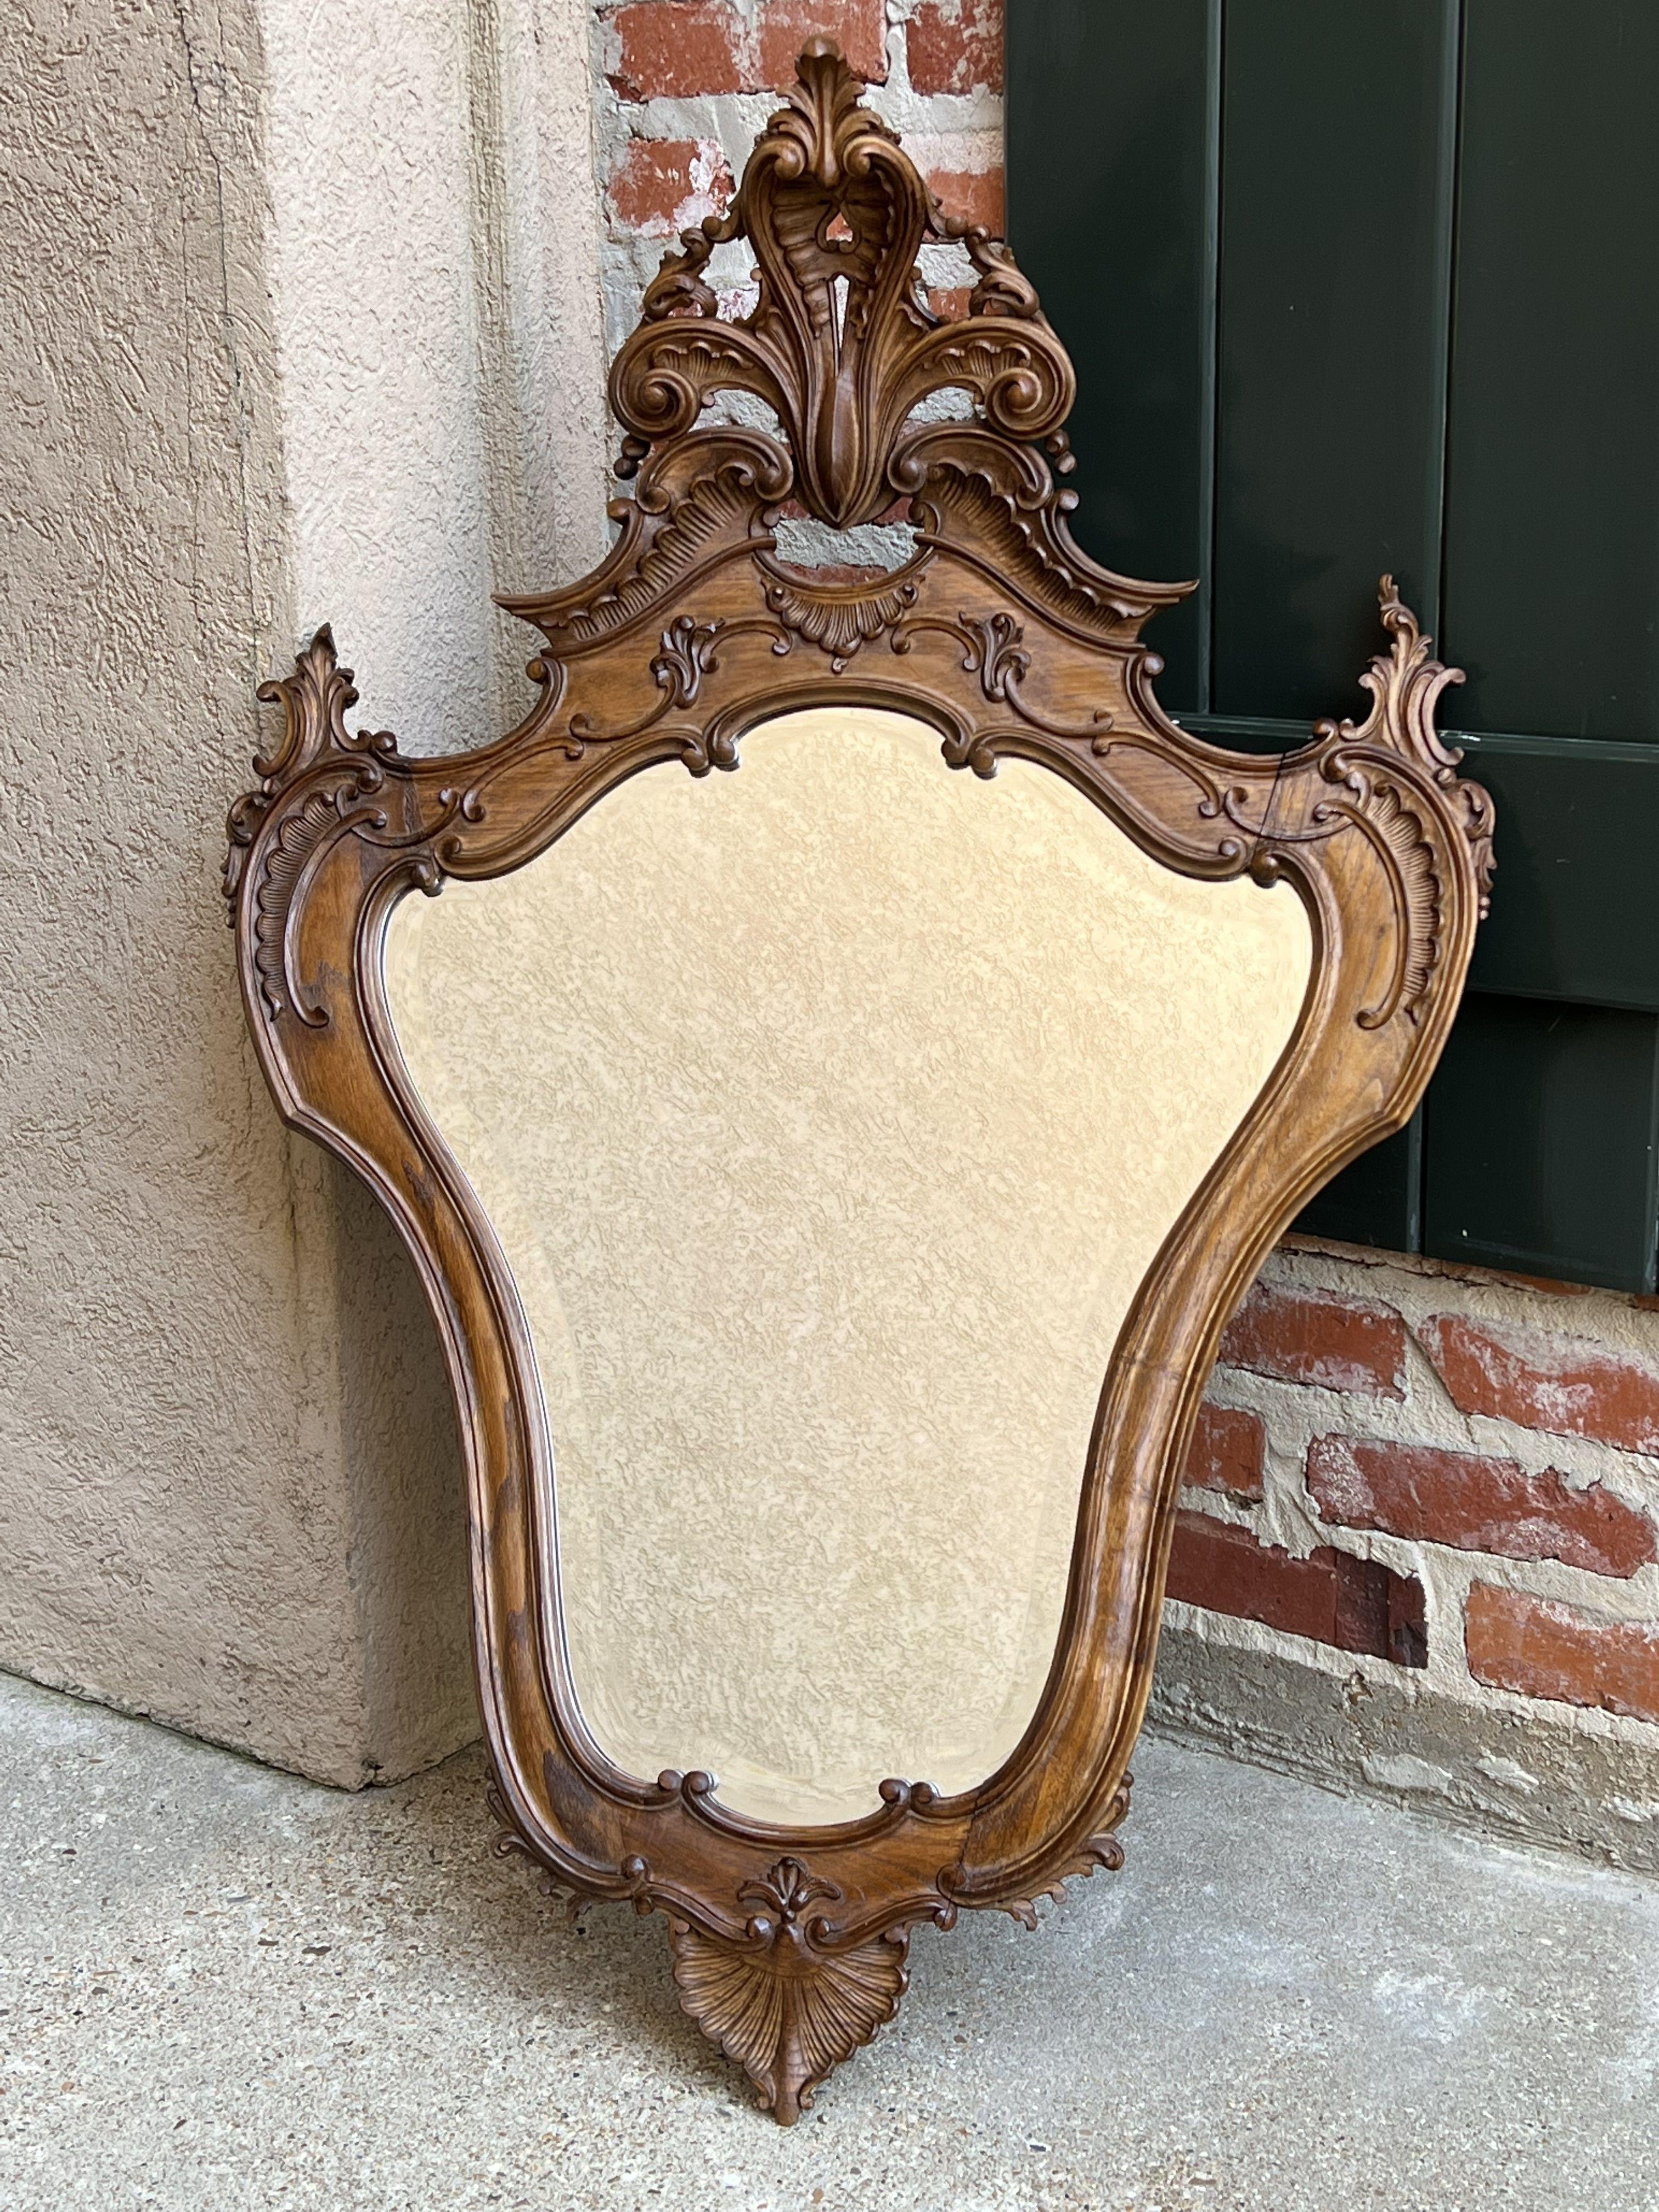 Antique French carved oak beveled wall mirror Louis XV style Serpentine Rococo.

Direct from France, a very ornate wall mirror, with stunning carvings.
Large, shaped crown features an open carved fleur de lis supported by carved serpentine